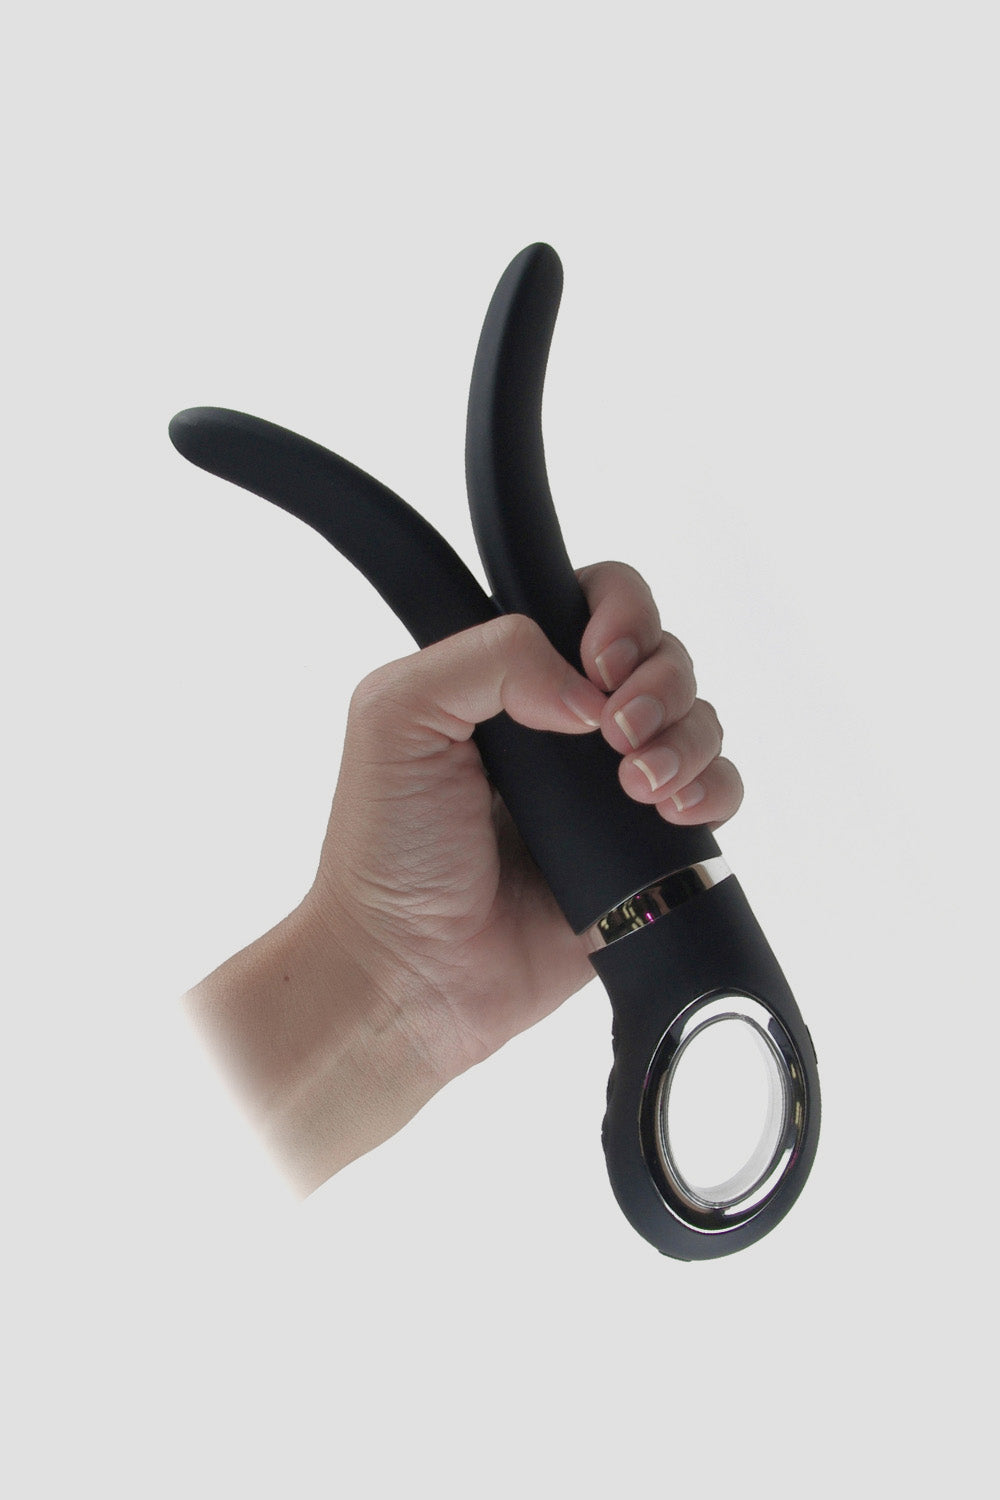 G Vibe Noir Limited Edition Vibrator Black, 7 Inches